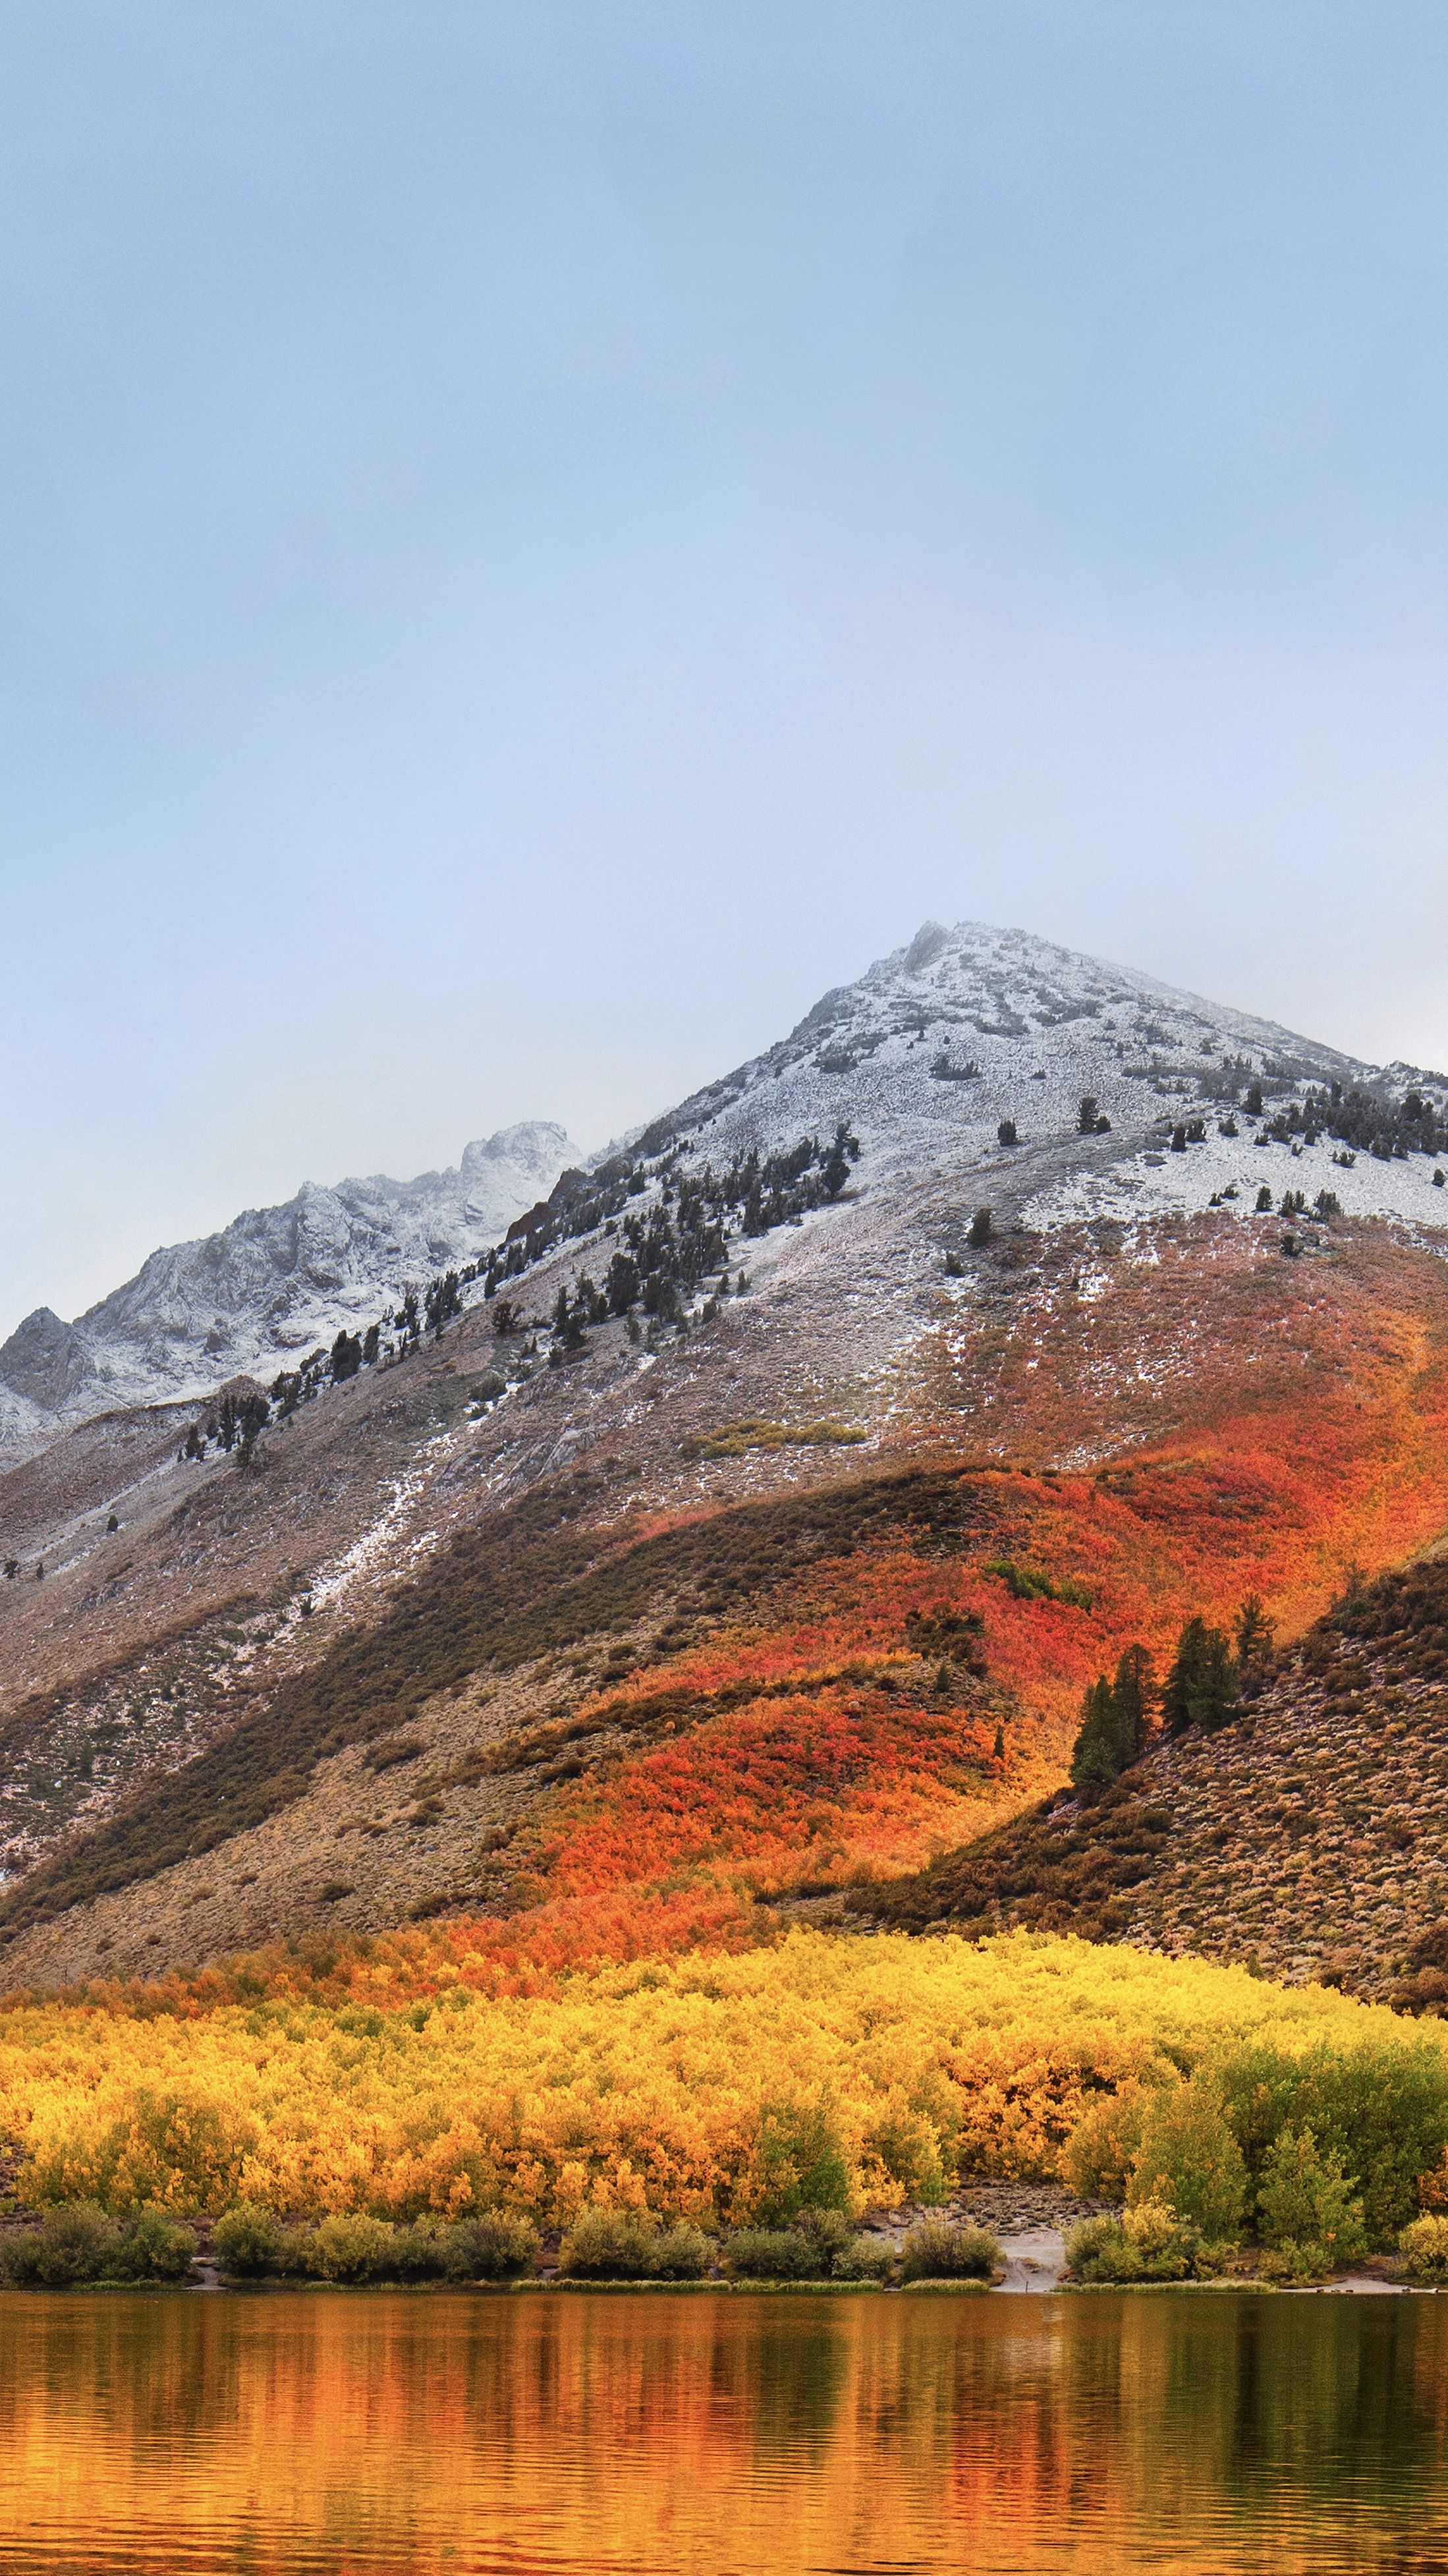 Download The macOS High Sierra Wallpaper For iPhone, iPad